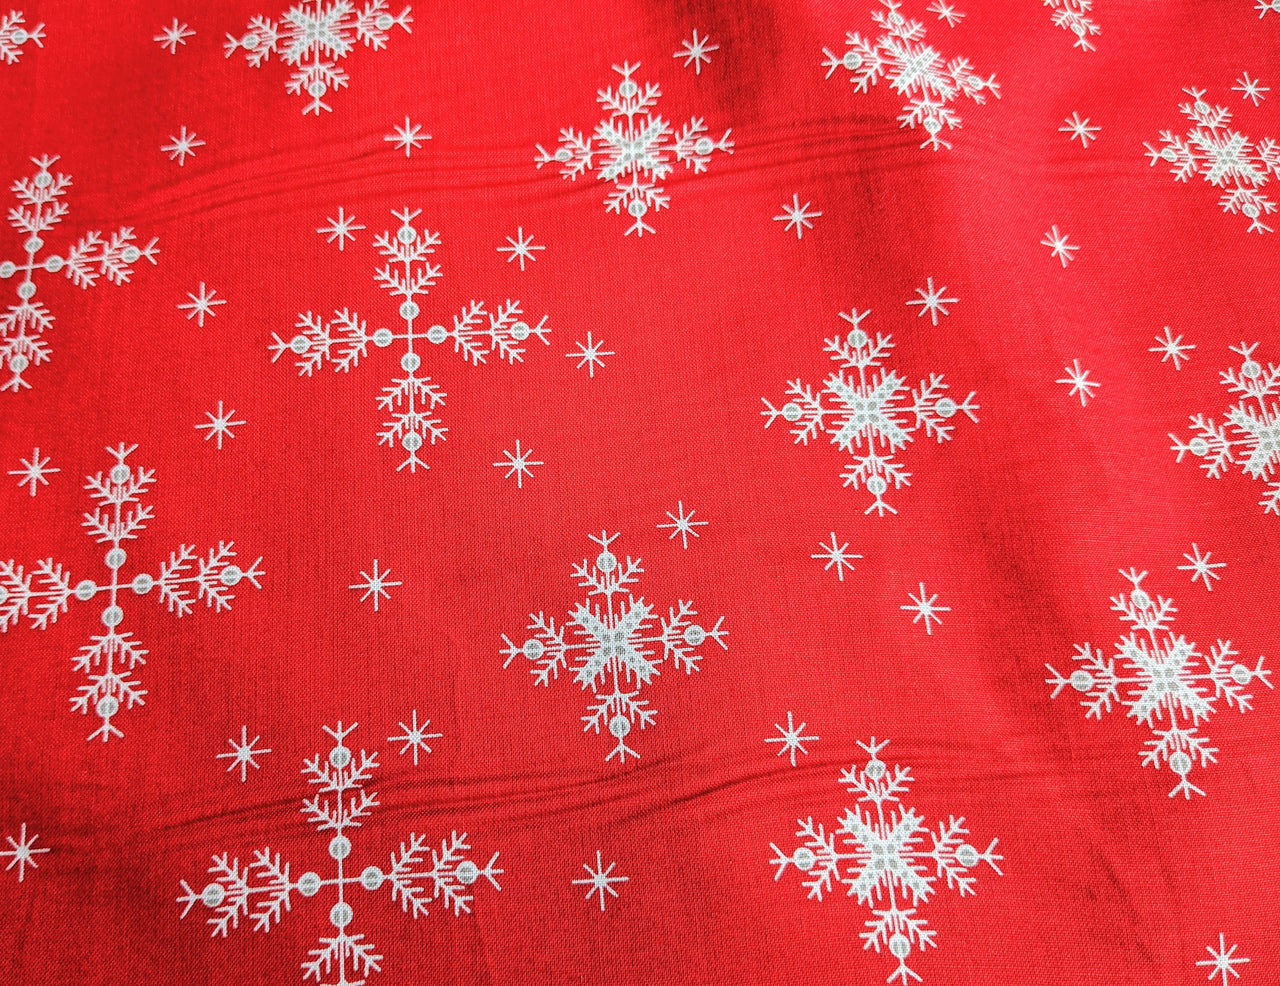 Red Cotton Fabric With White Snowflakes Christmas Fabric, Festive Fabric, Holiday Fabric